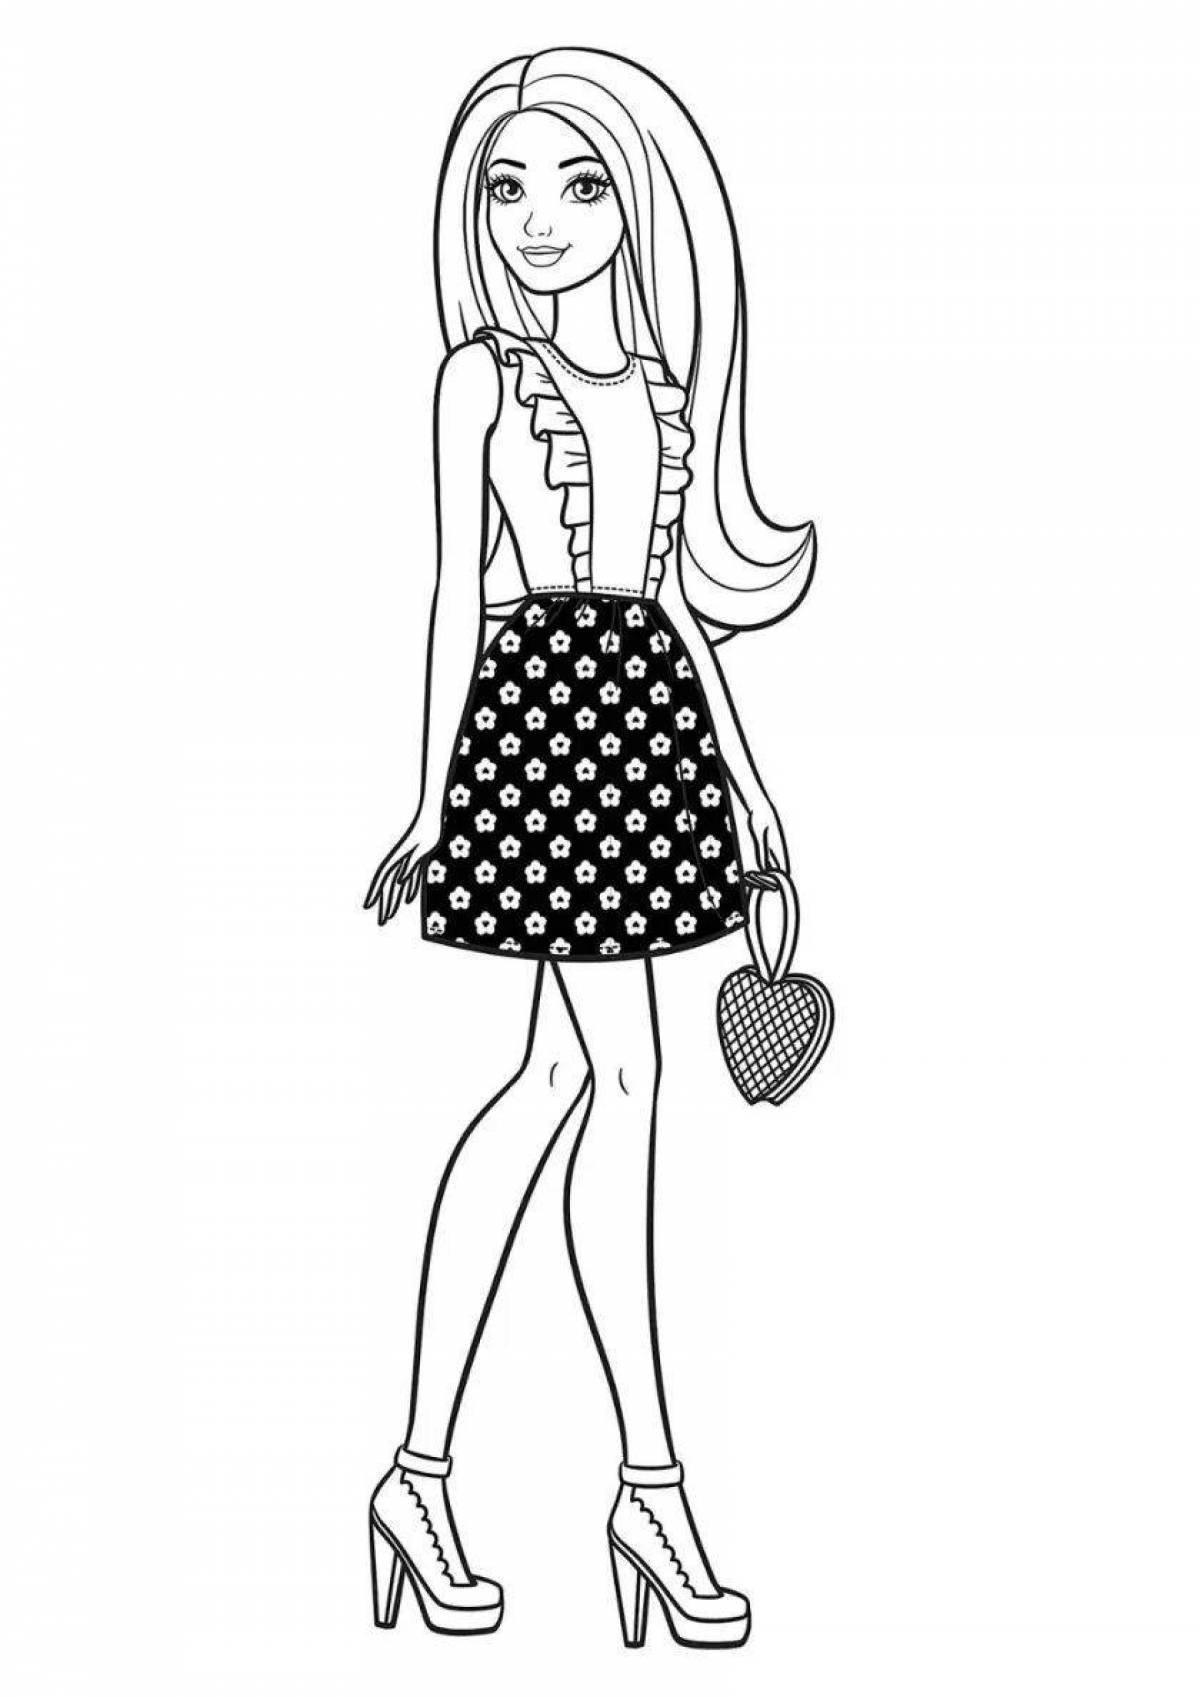 Luxury barbie outfit coloring pages